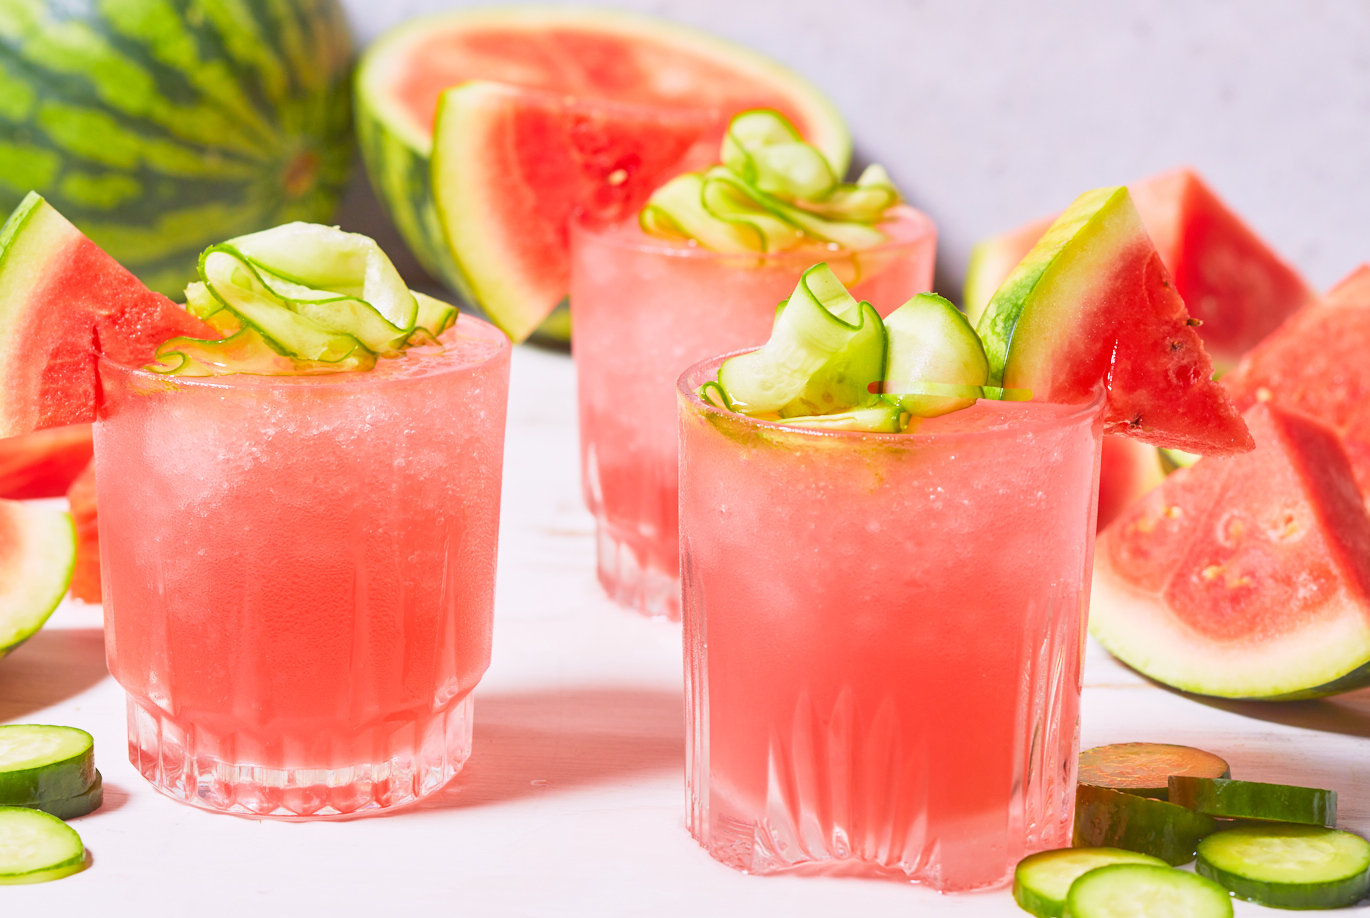 Trader Joe's Watermelon Cucumber Cooler; shown in several glasses, blended with ice and topped with a triangle of fresh watermelon and cucumber ribbons